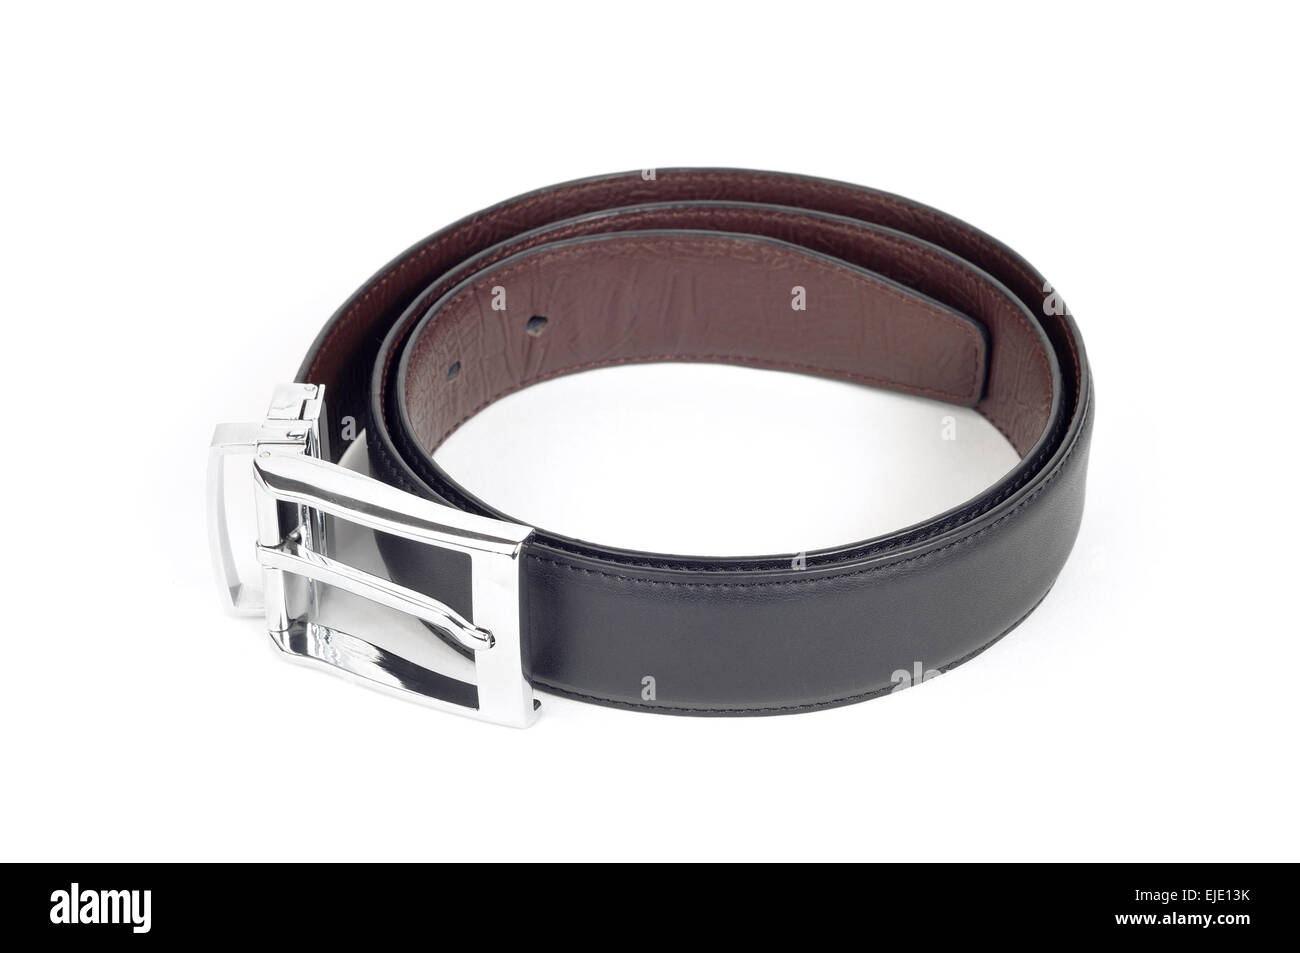 bilateral black and brown leather belt on white background Stock Photo